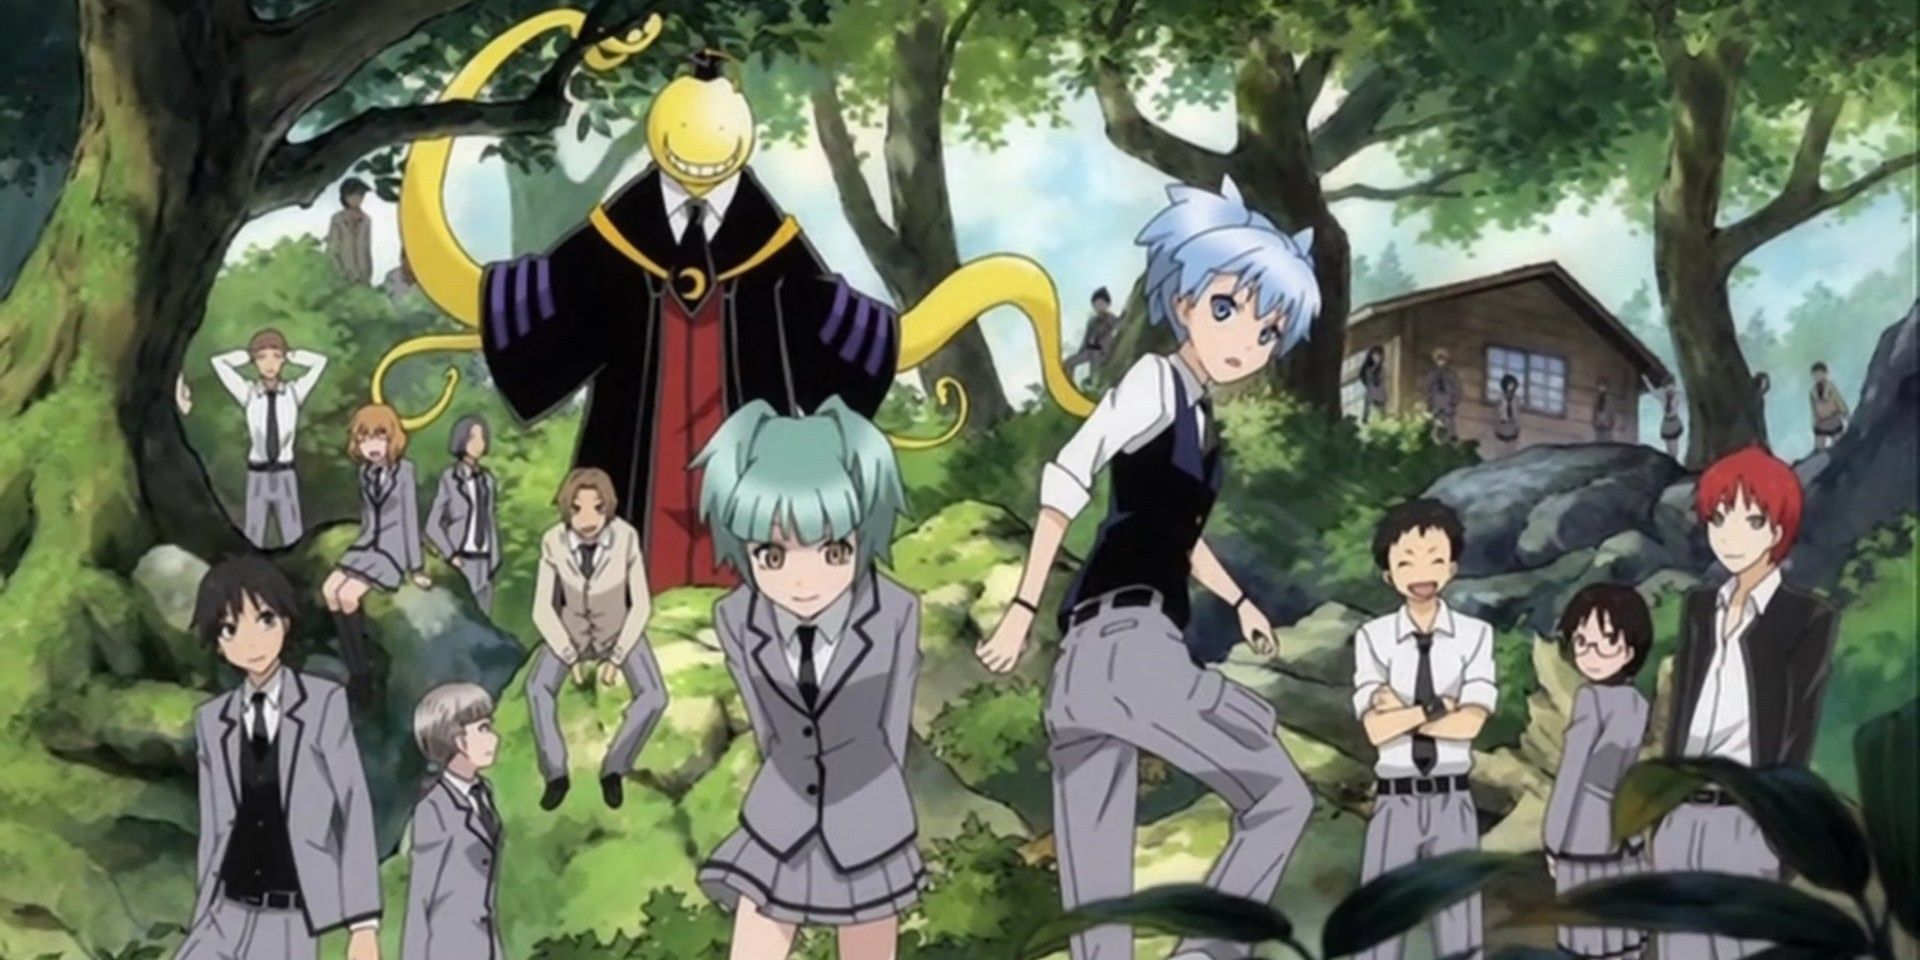 10 anime to watch if you are a fan of Assassination Classroom